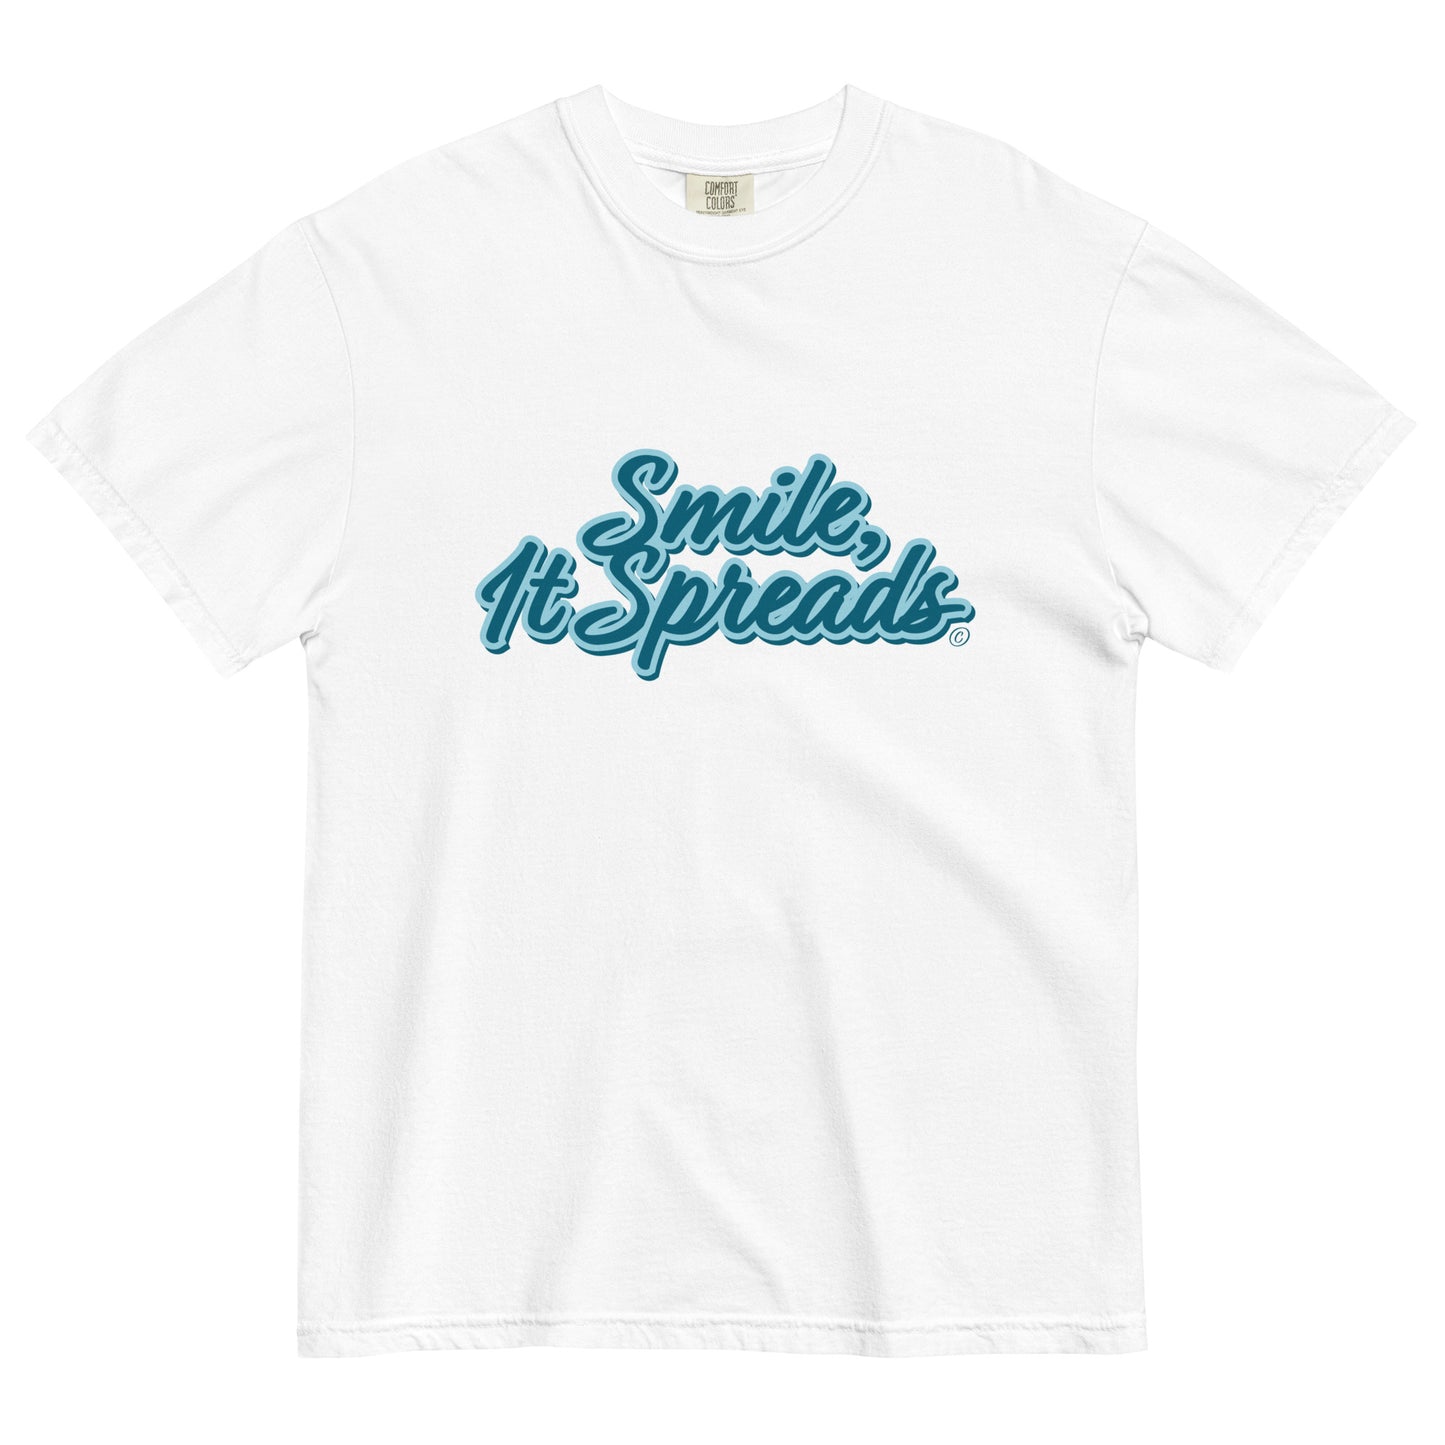 Smile, It Spreads Unisex Garment Dyed T Shirt